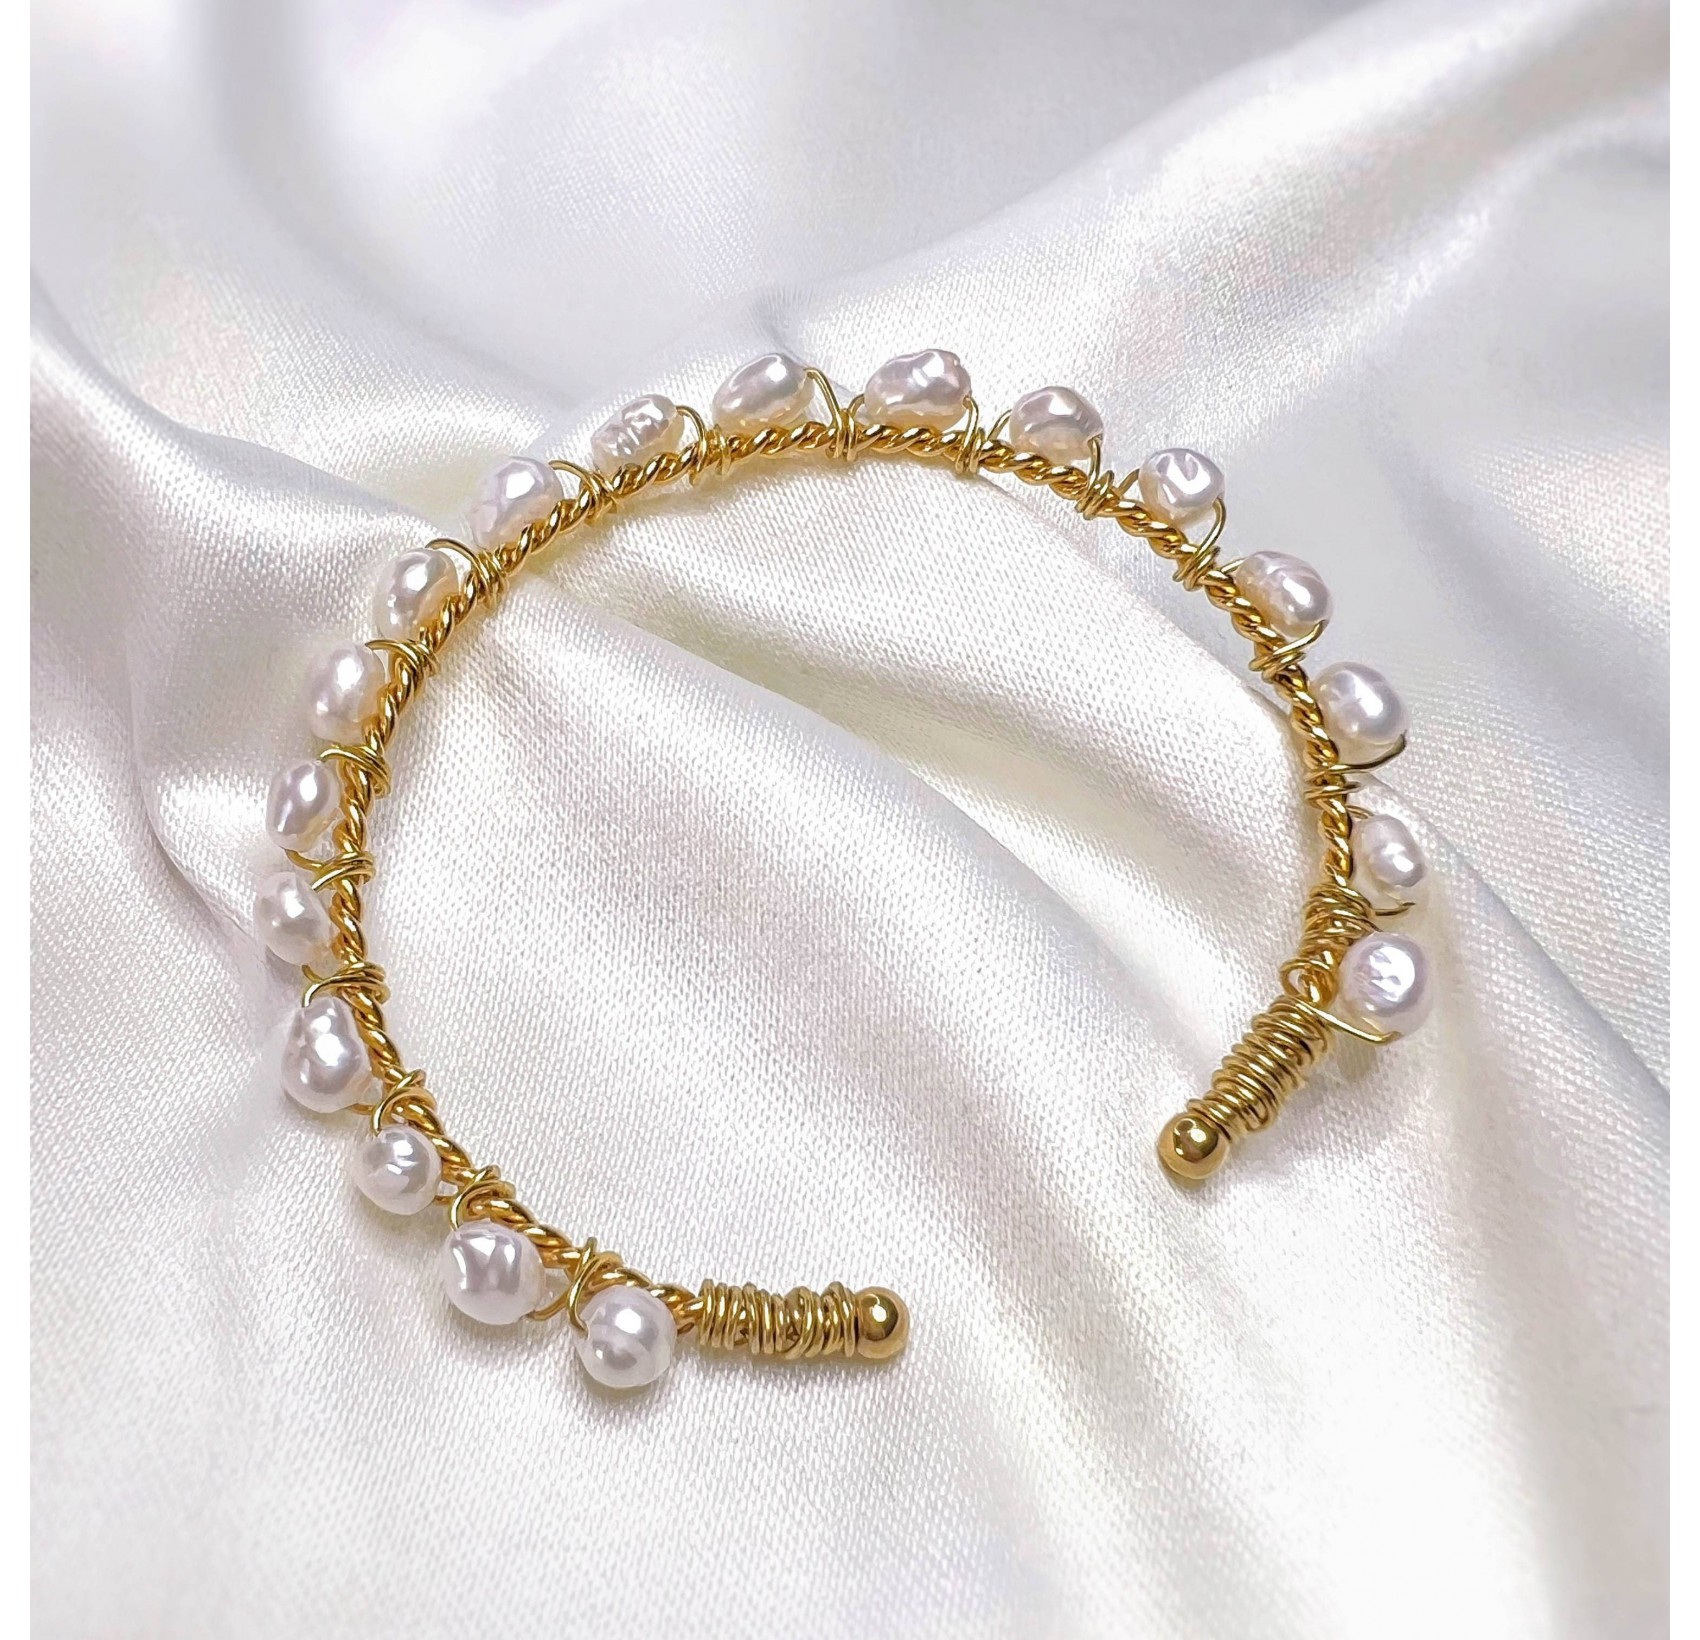 TAYA gold-plated twisted link bracelet in stainless steel and freshwater baroque pearls | Gloria Balensi jewellery